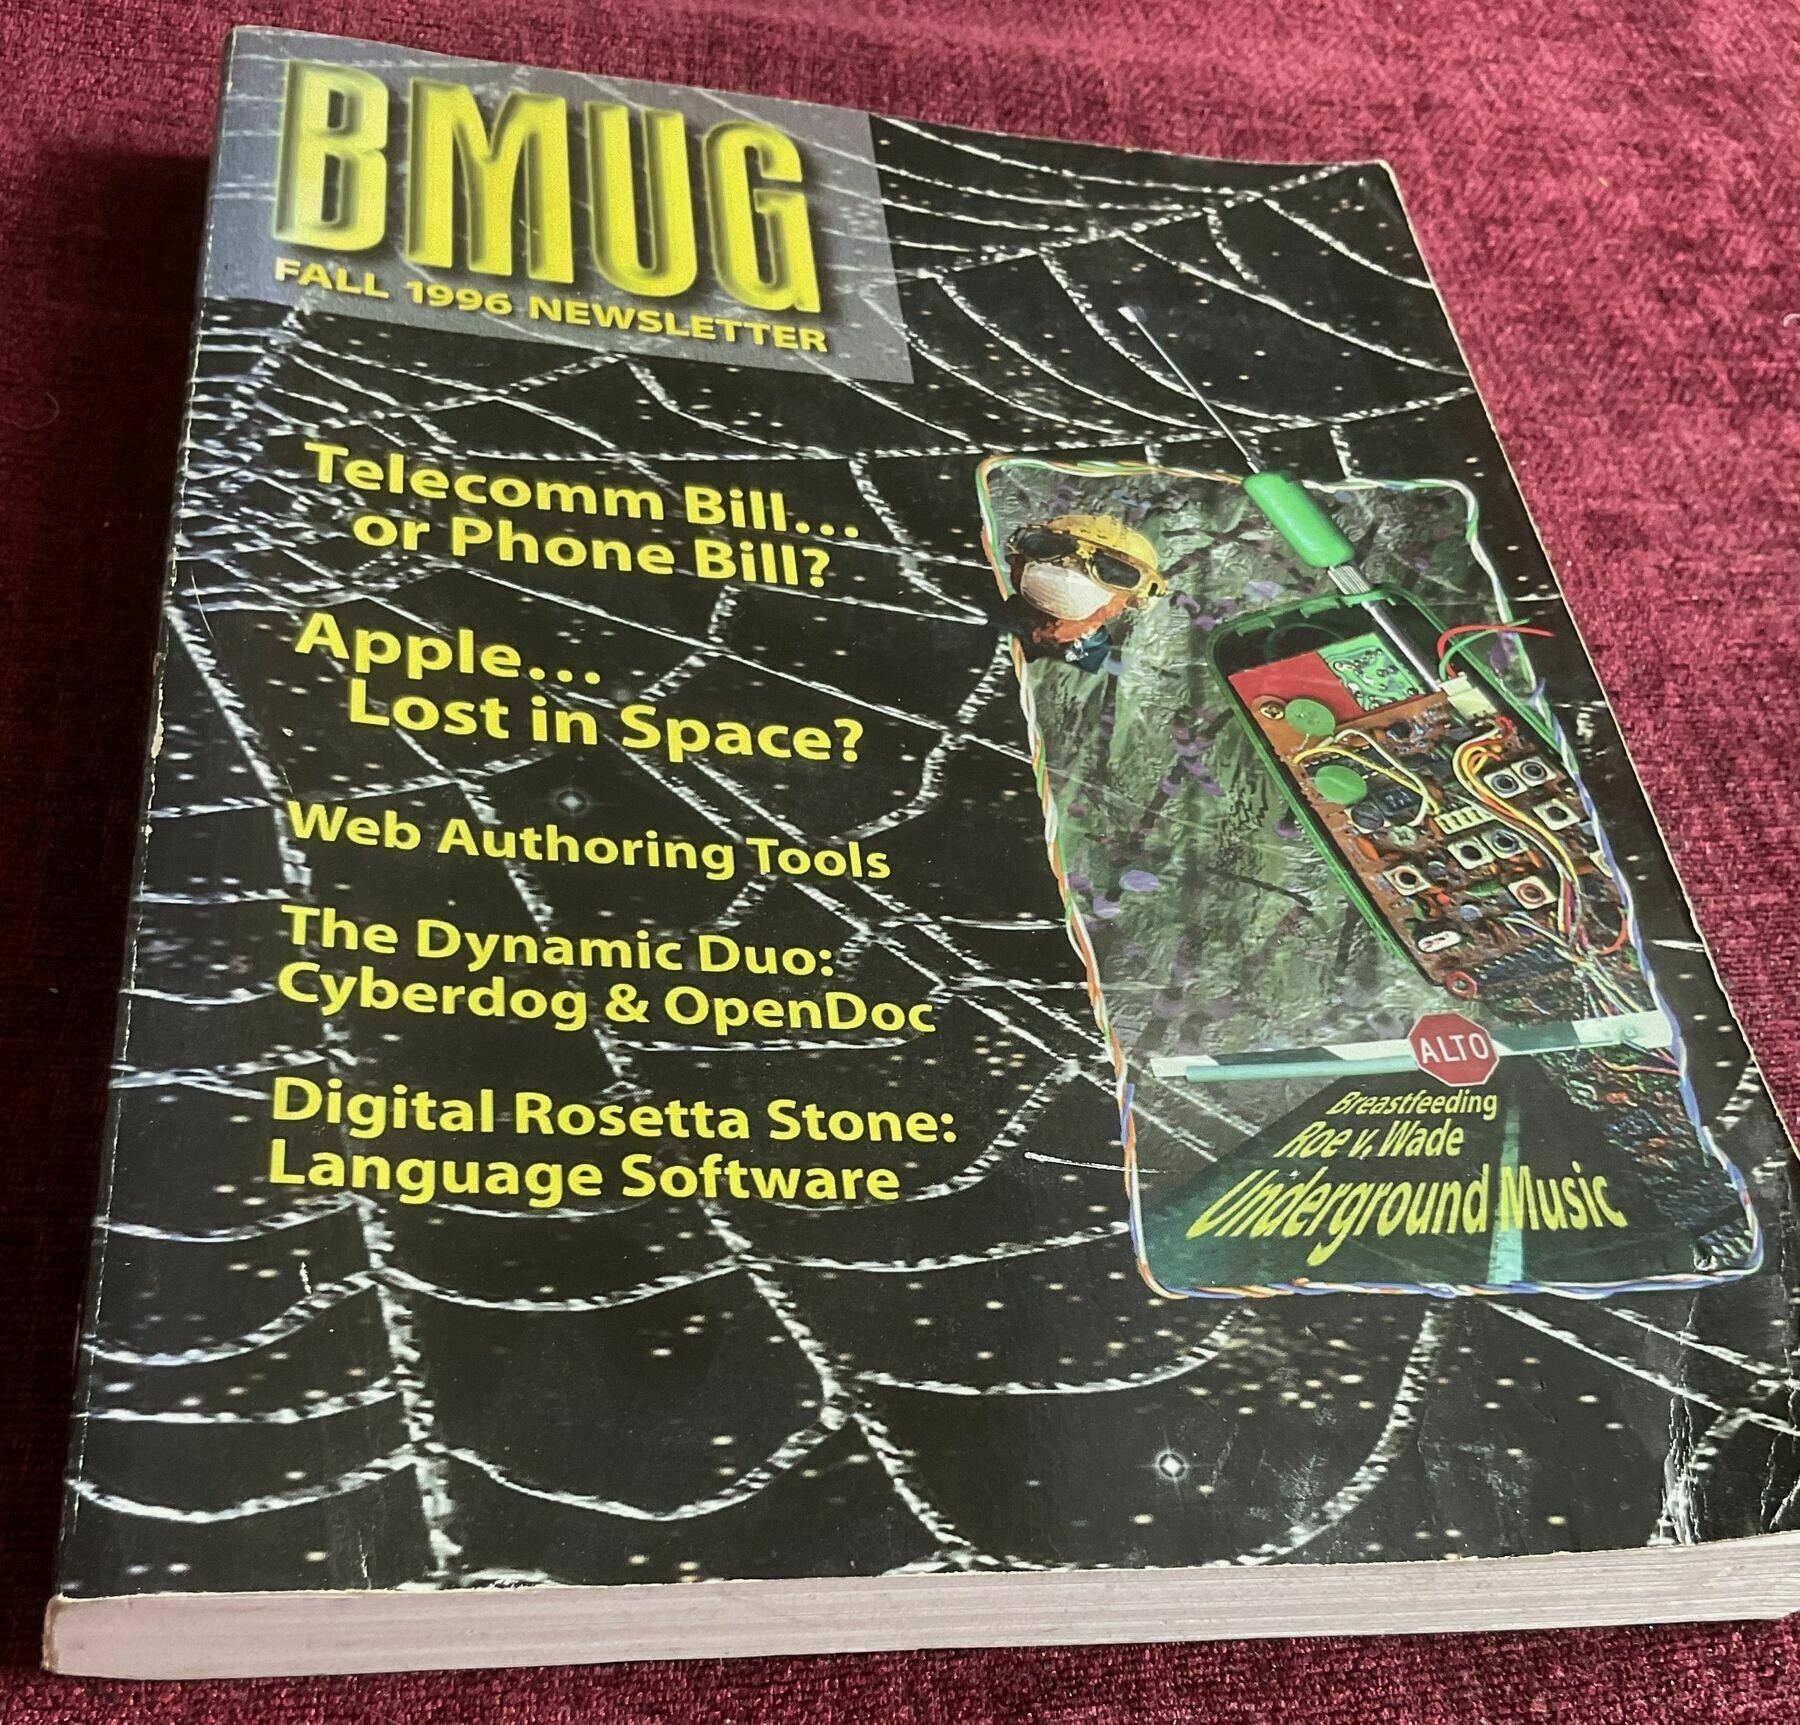 The front cover of the BMUG Fall 1996 newsletter anthology. Yellow text list 5 article titles over a section of a spiders web on a black background.